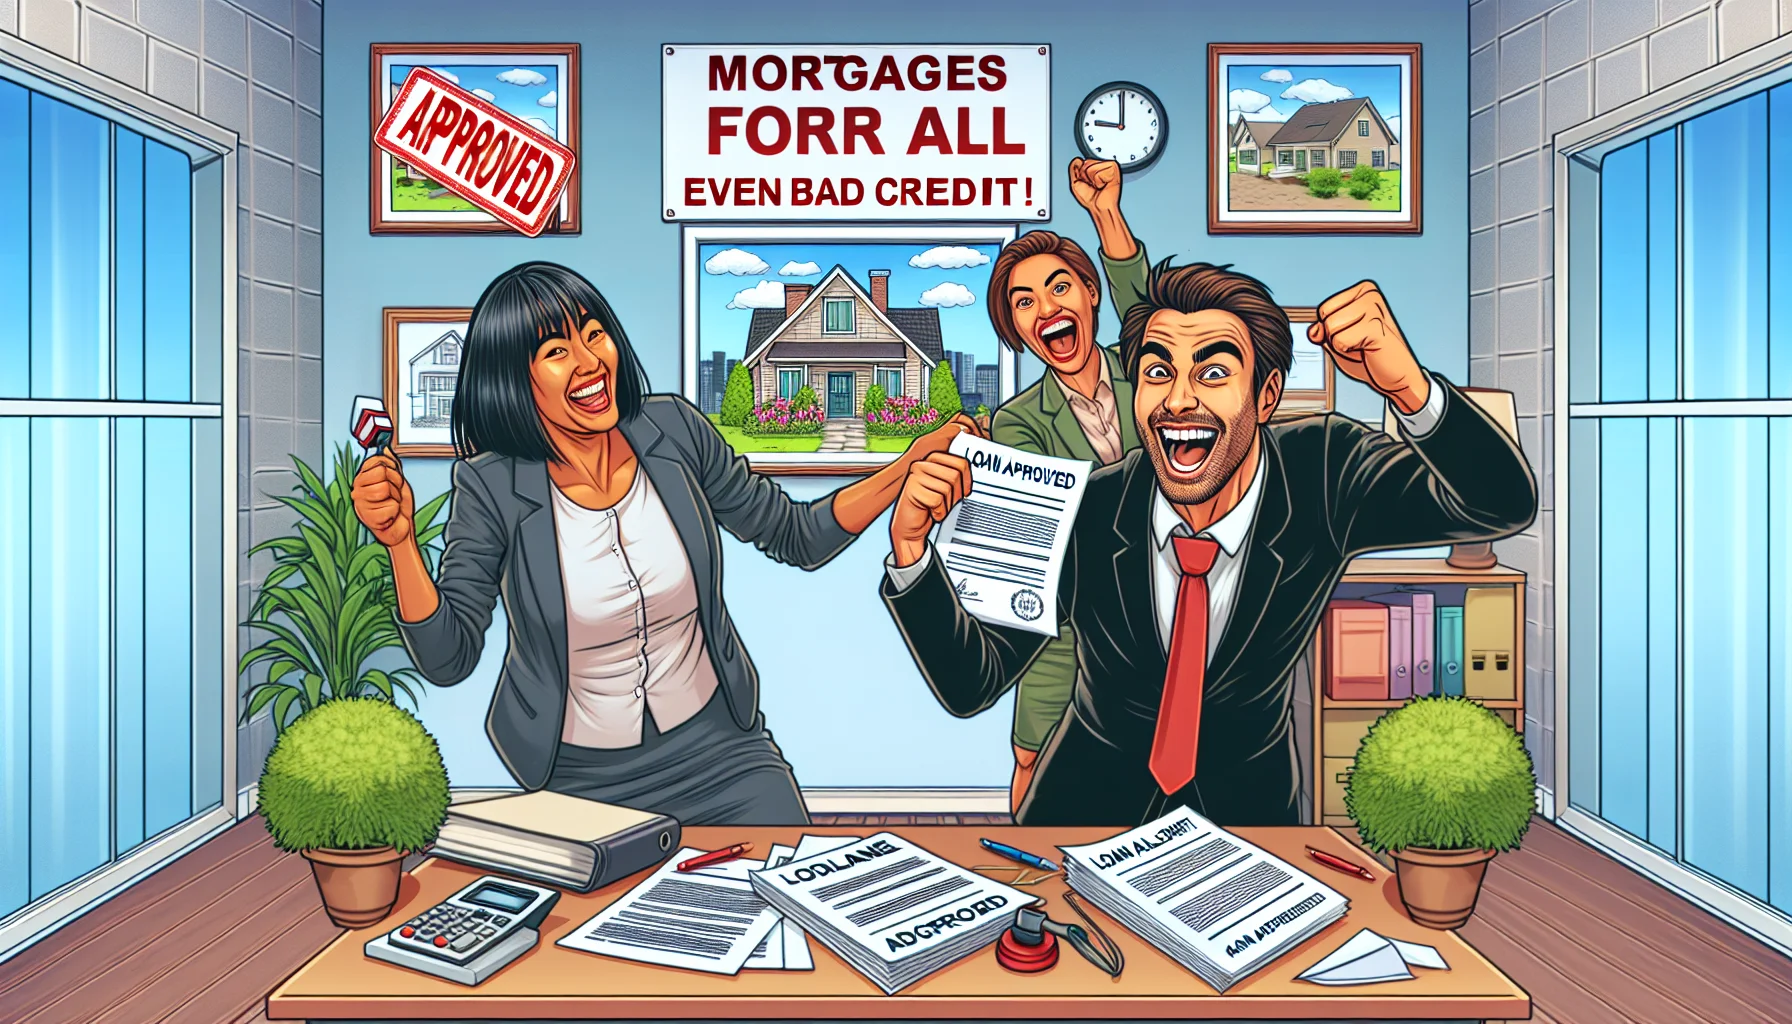 A humorous scene in a cheerful real estate office where the employees are joyous after approving a loan for a customer with bad credit. The office is decorated with plants, diagrams of houses, photos of properties, and a billboard saying 'Mortgages for all, even bad credit!'. In the center, a jubilant male employee from the Caucasian descent is holding a 'Loan Approved' stamp and a satisfied female customer of South Asian descent is holding a contractual document towards the viewer. Their happy expressions indicate that they have just closed a perfect deal.